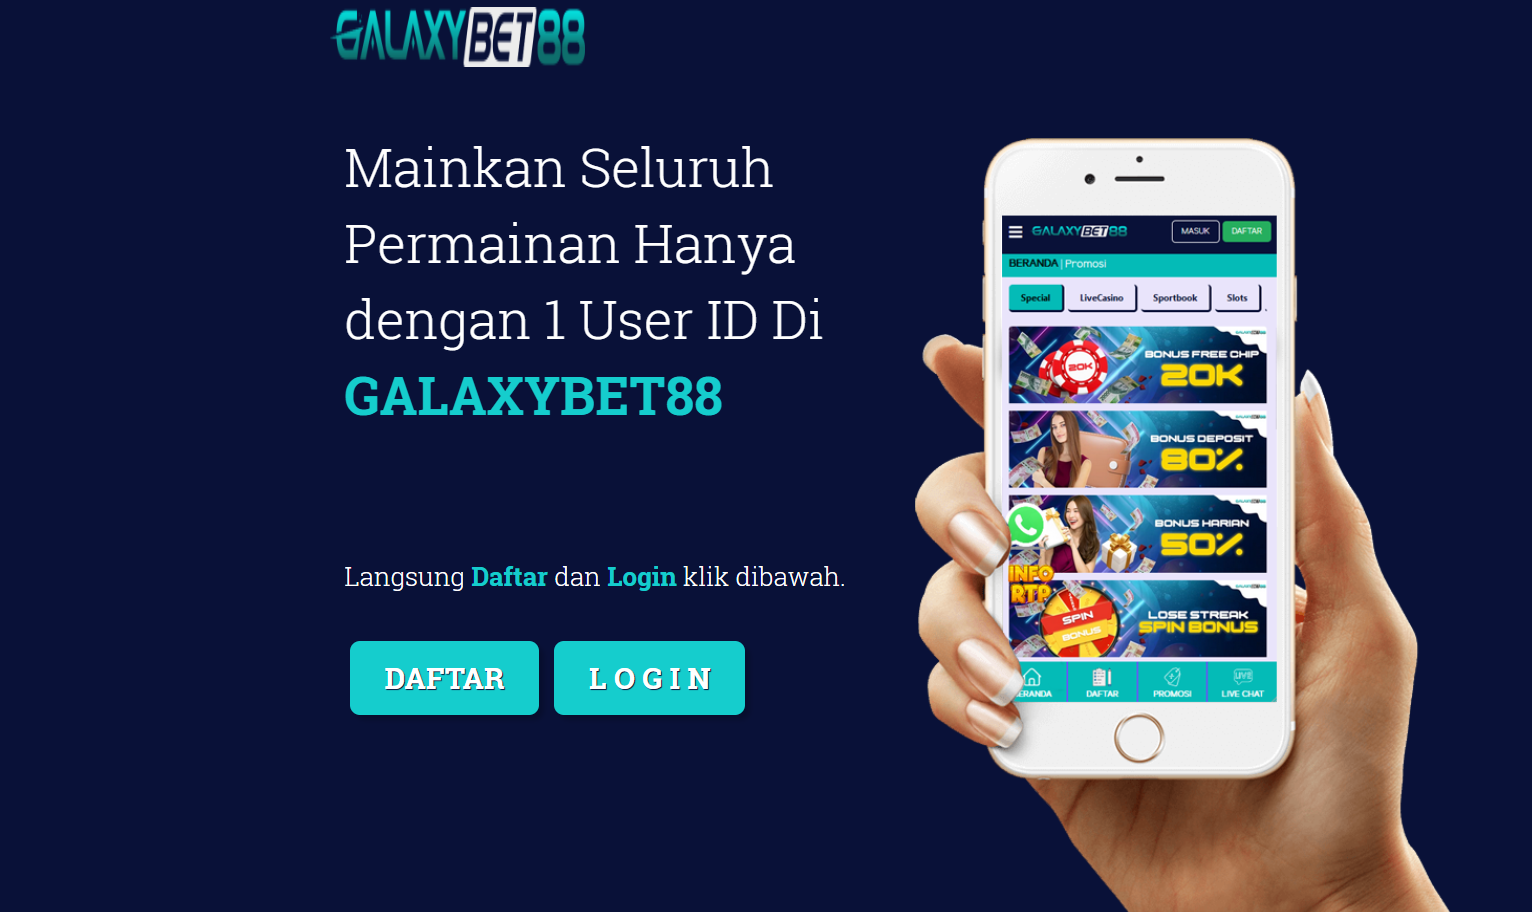 GALAXYBET88